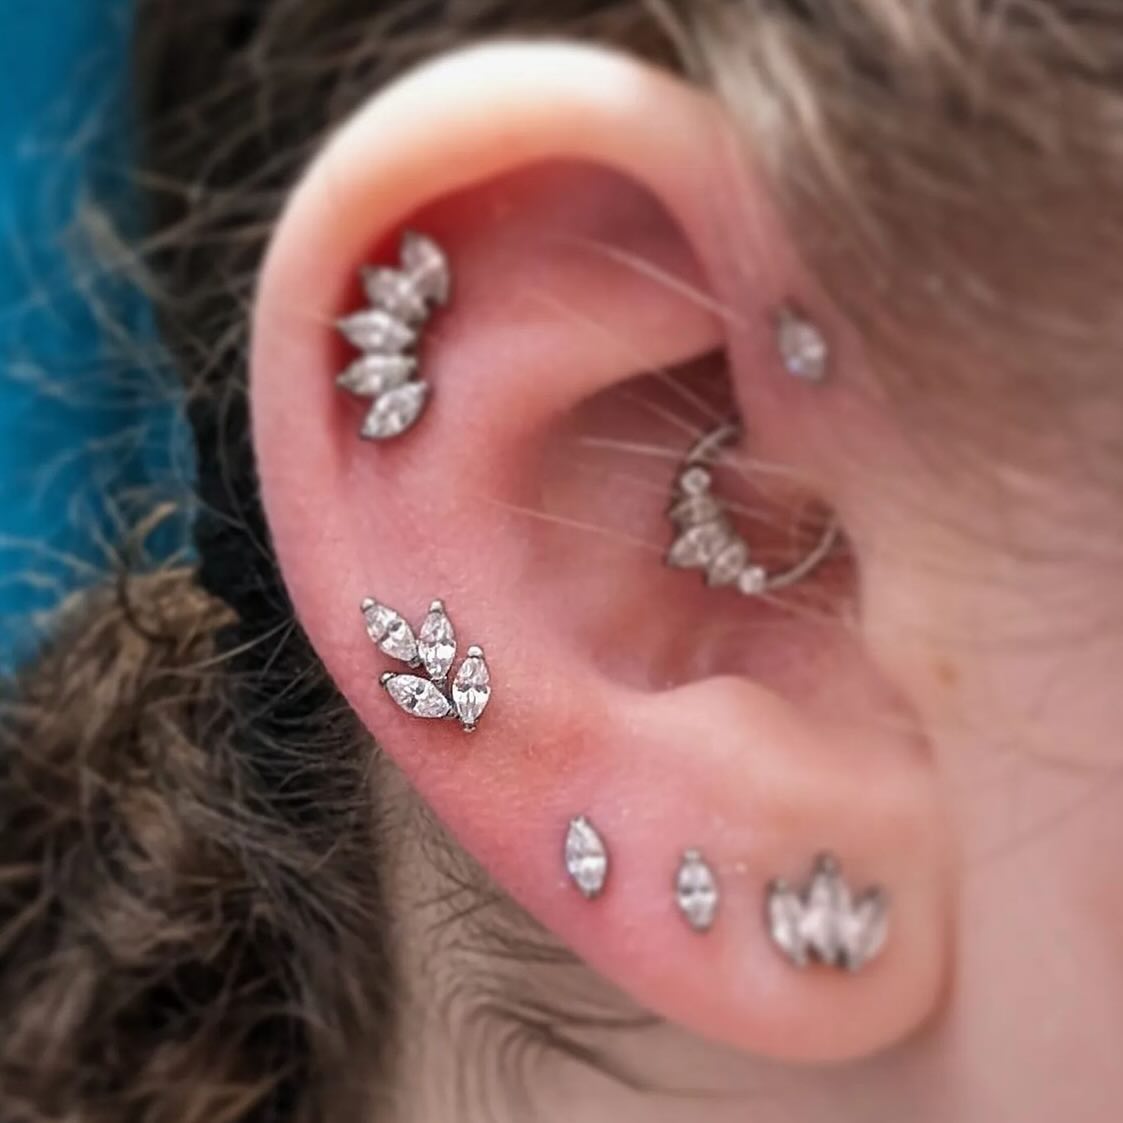 Sweet mid helix done for sarah_gregory13 ‘s client 💎 

If we don’t have what you want for your fresh or healed piercing let us know and we will order it for you🙏🏼

If you wish to book a piercing appointment you can do so through our website ❤️

                       